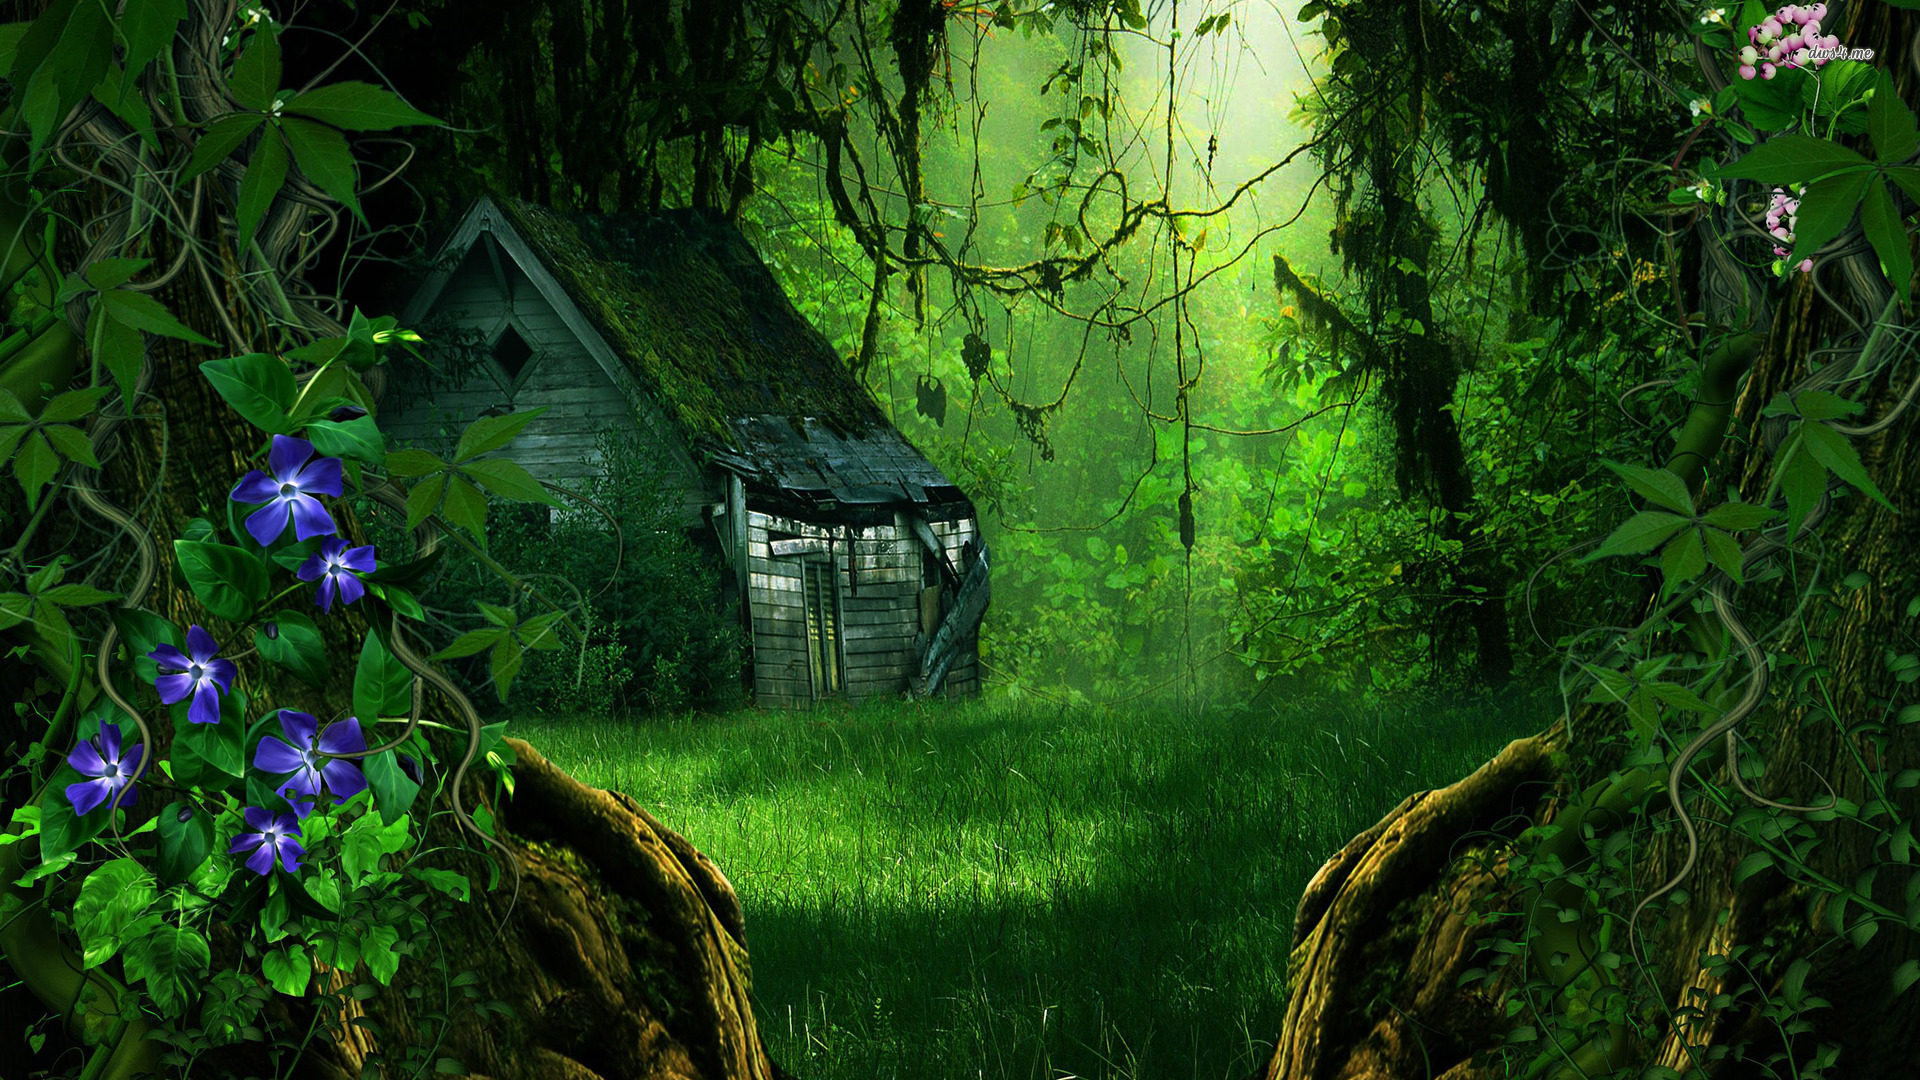 Fantasy Forest Wallpaper 1920x1080  in the forest 1920x1080